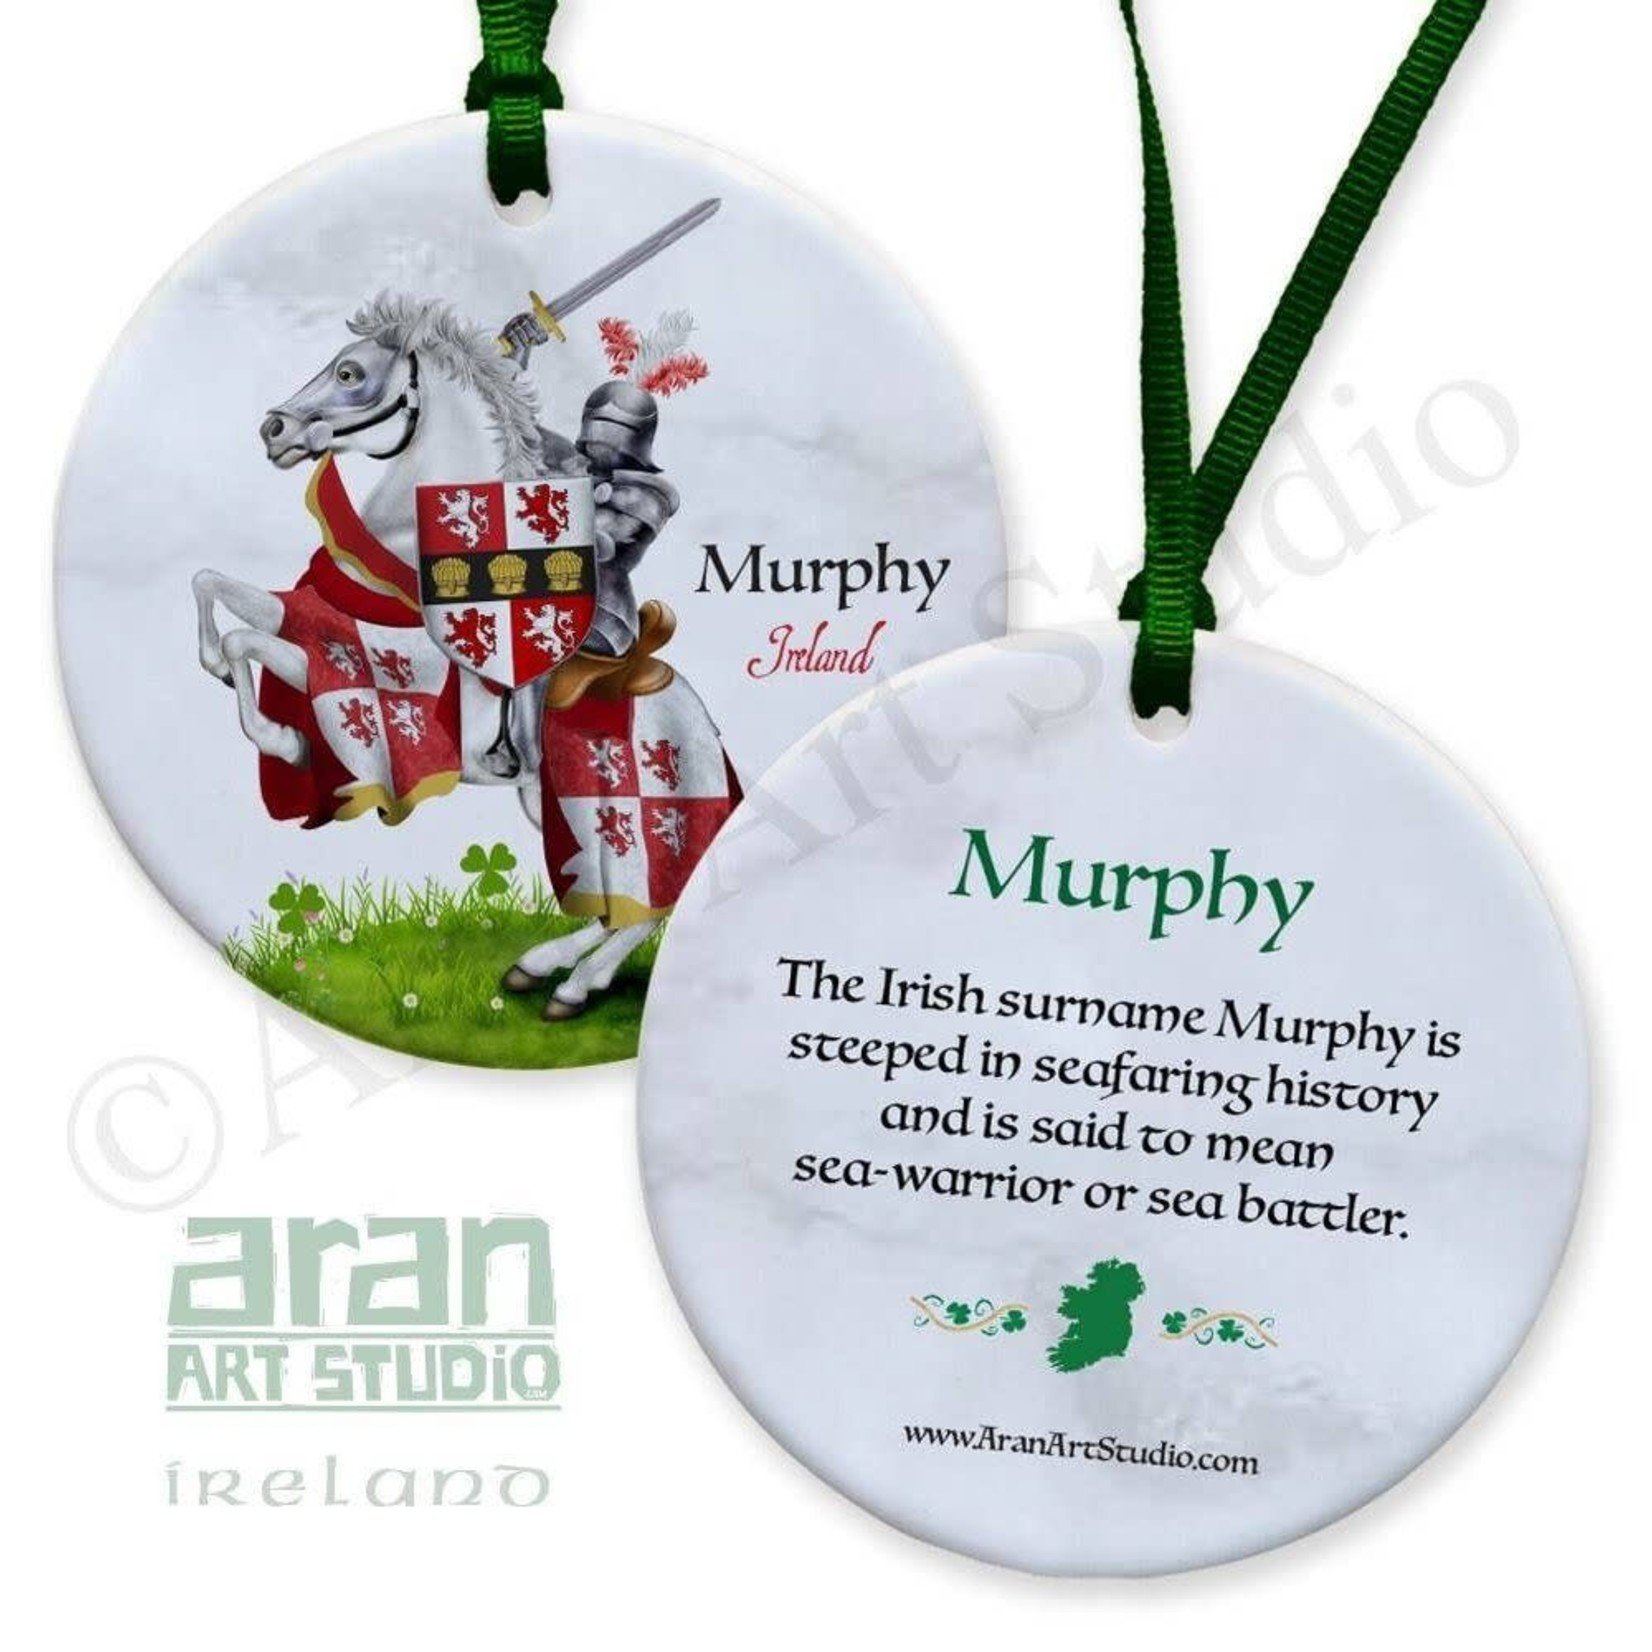 Aran Art Studio Coat of Arms Ornament with Meaning: Murphy